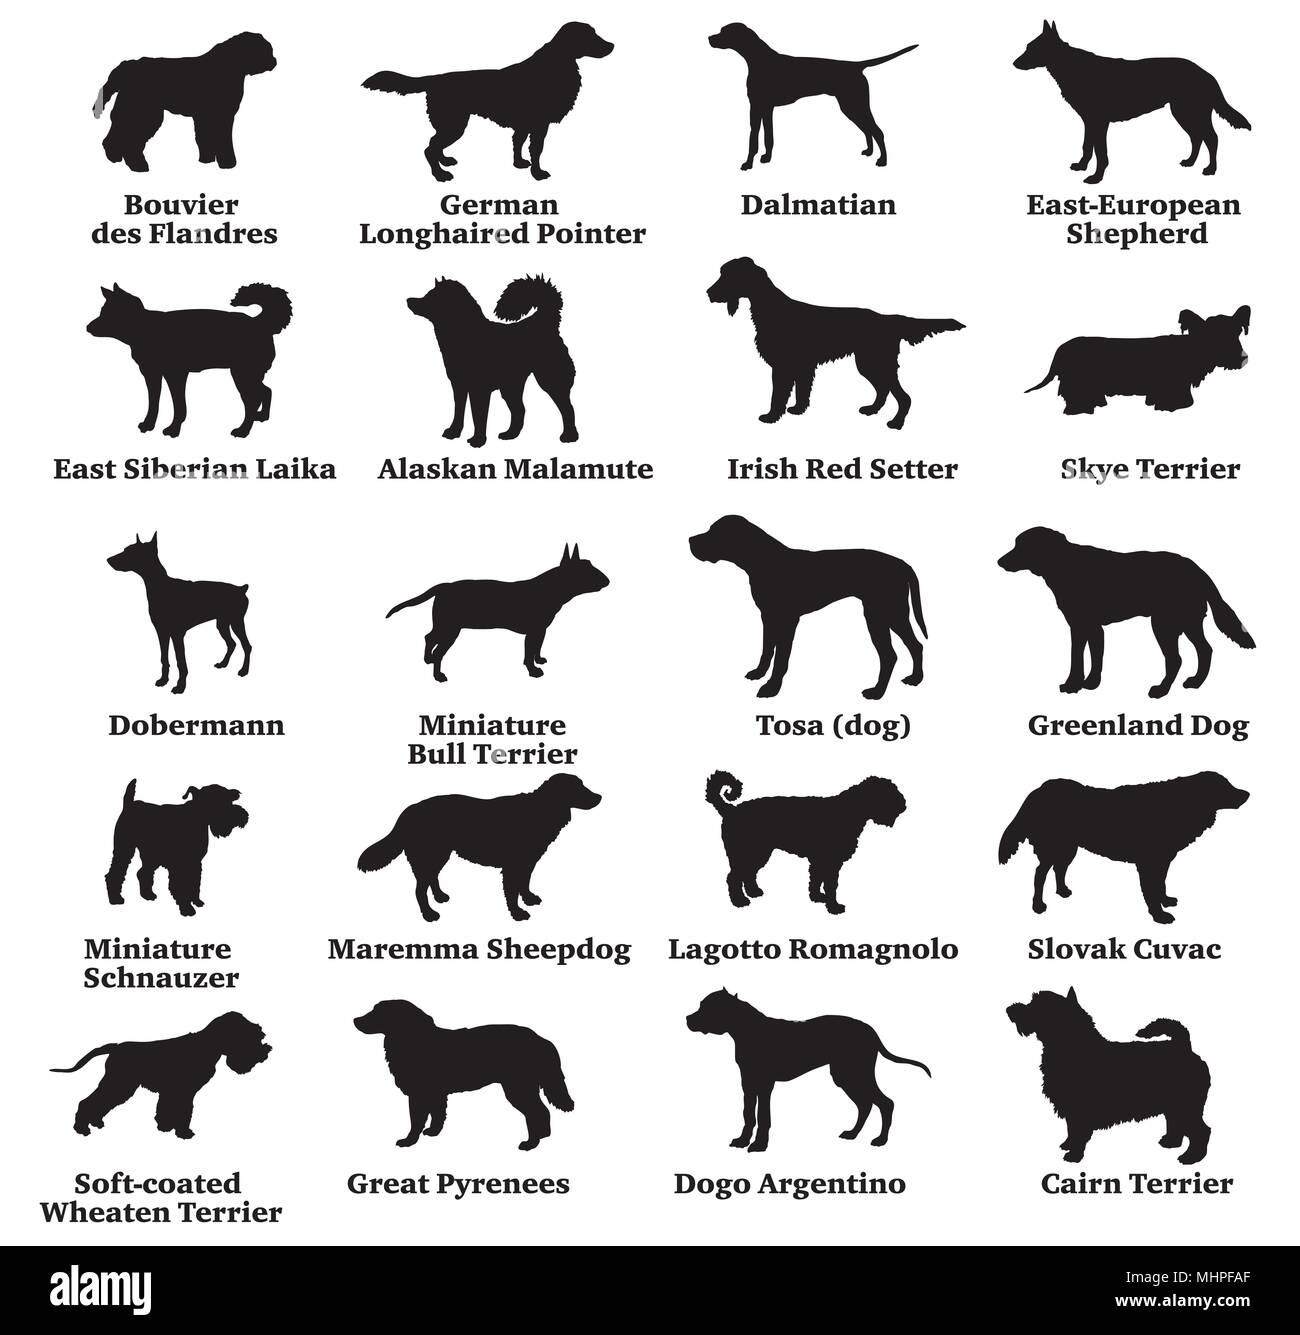 what color is black to dogs